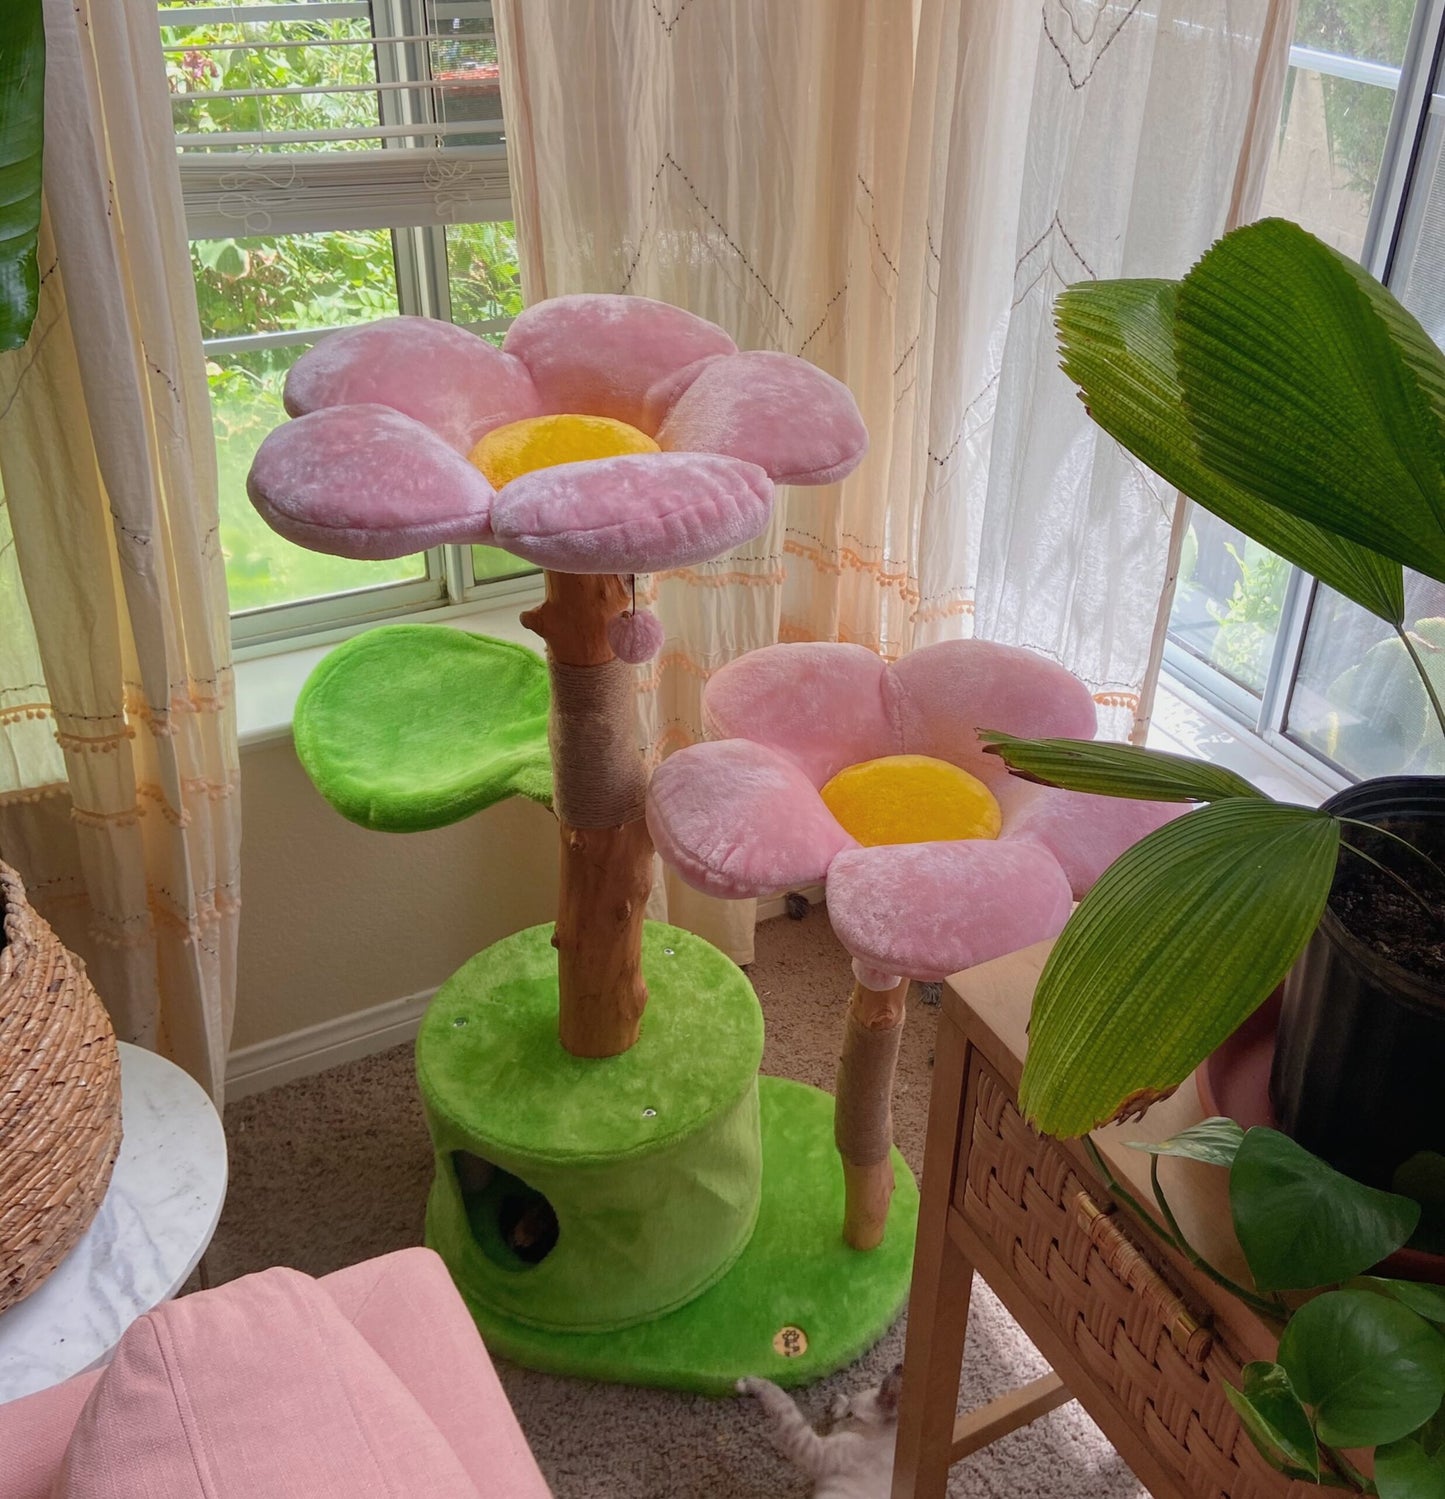 Floral cat tree with pink flowers and a plant, creating a cozy space for cats with a floral aesthetic